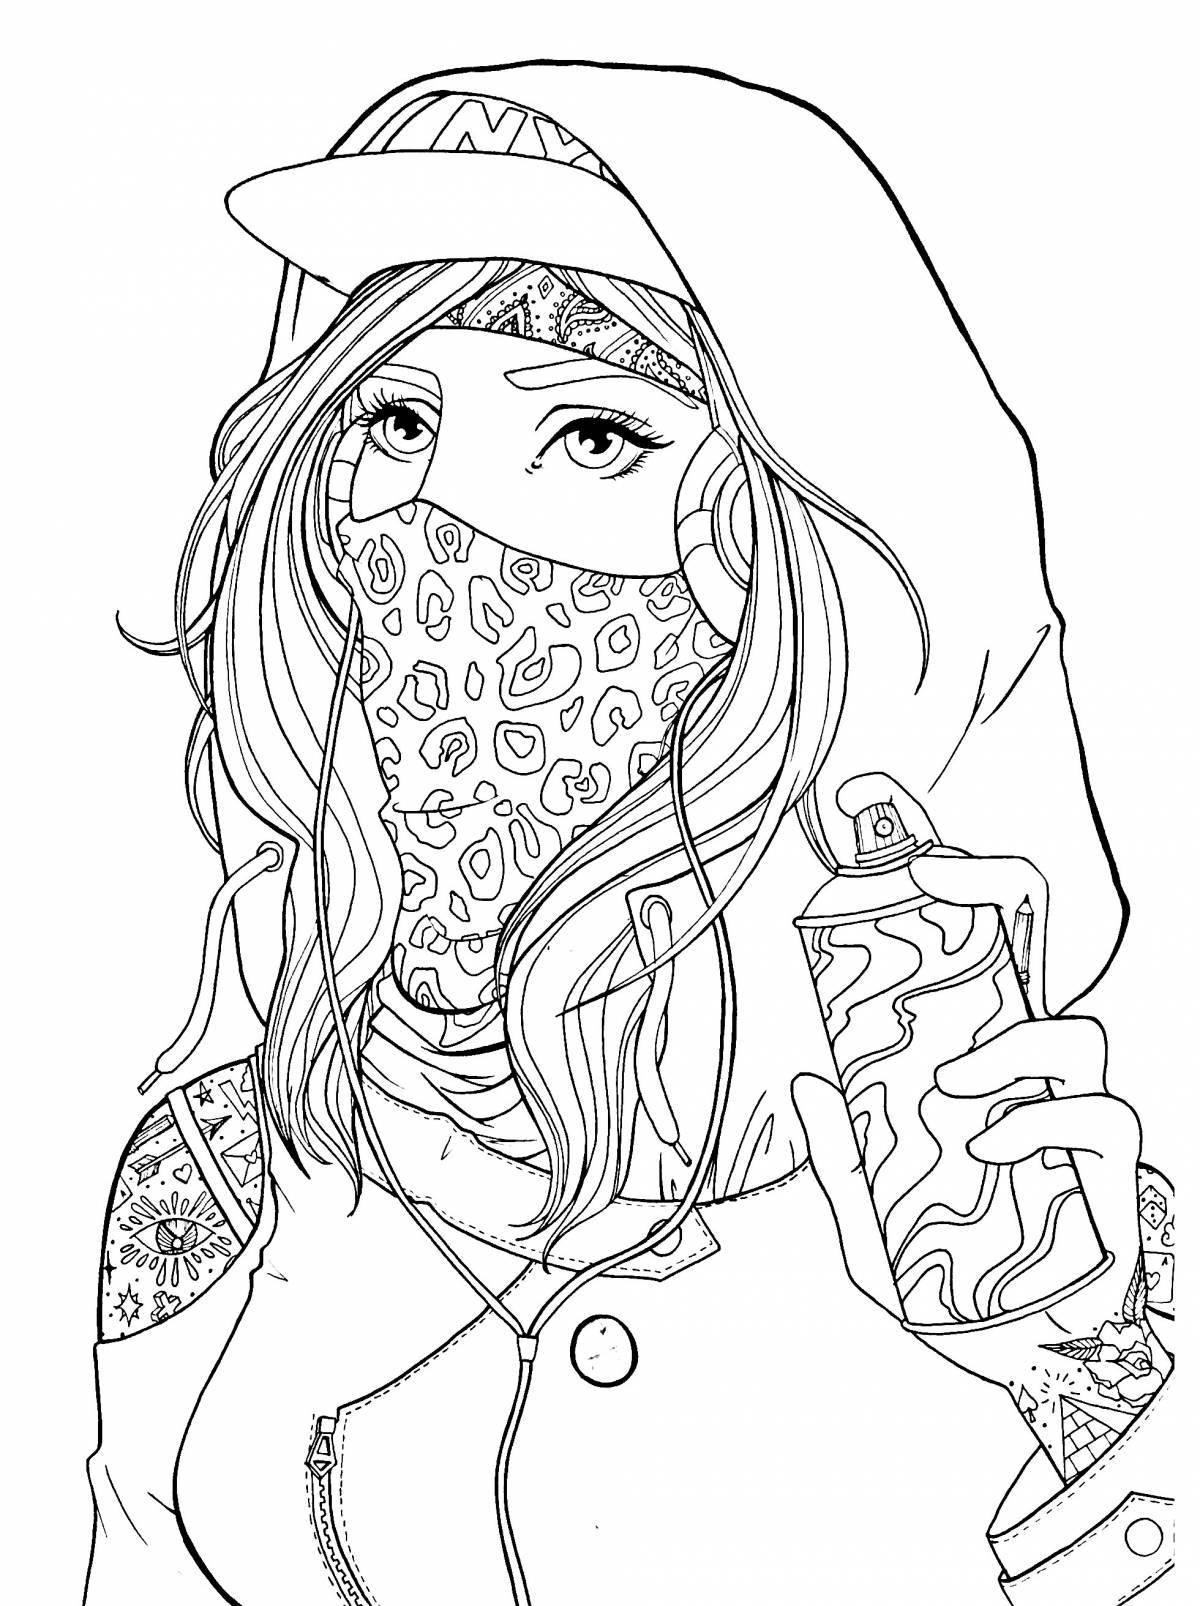 Color-explosive coloring page 12-13 years old